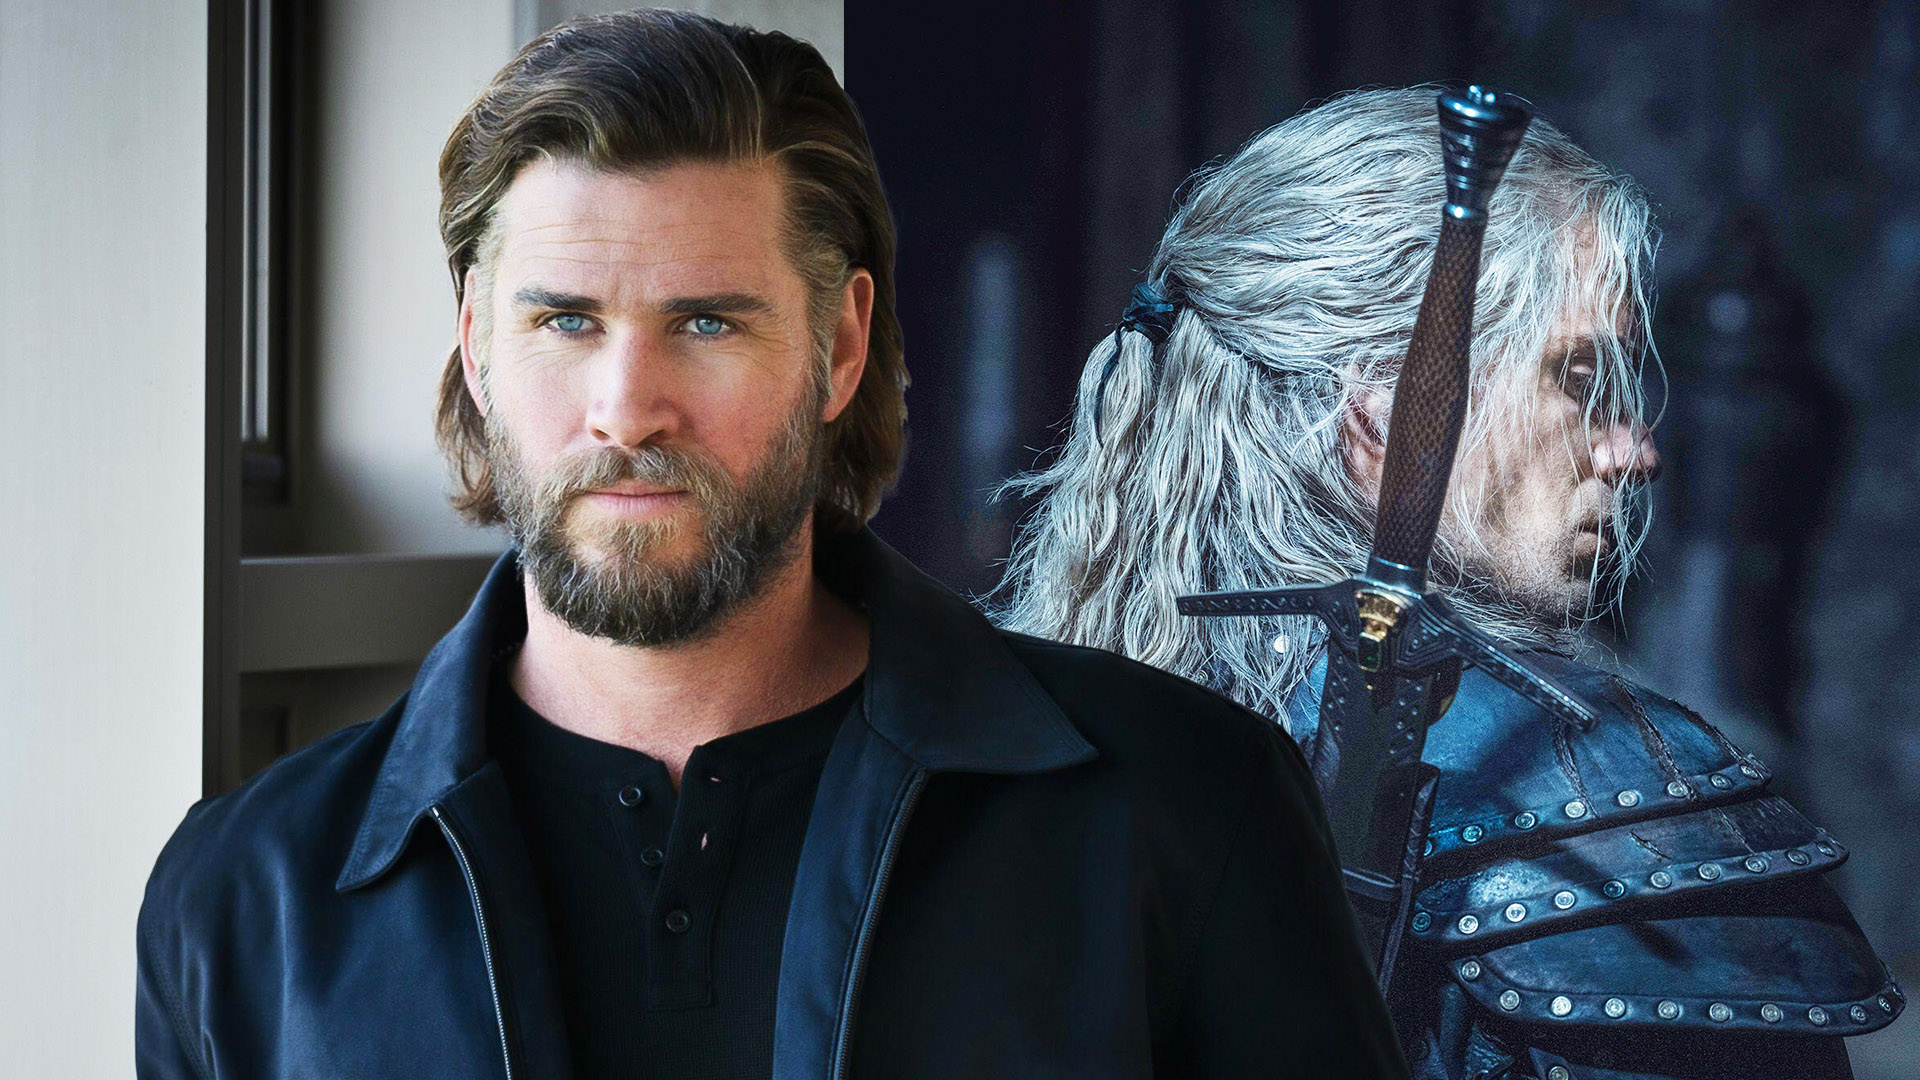 Cavill Out, Hemsworth in, but the Witcher Fans Declare Season 3 to Be the Last